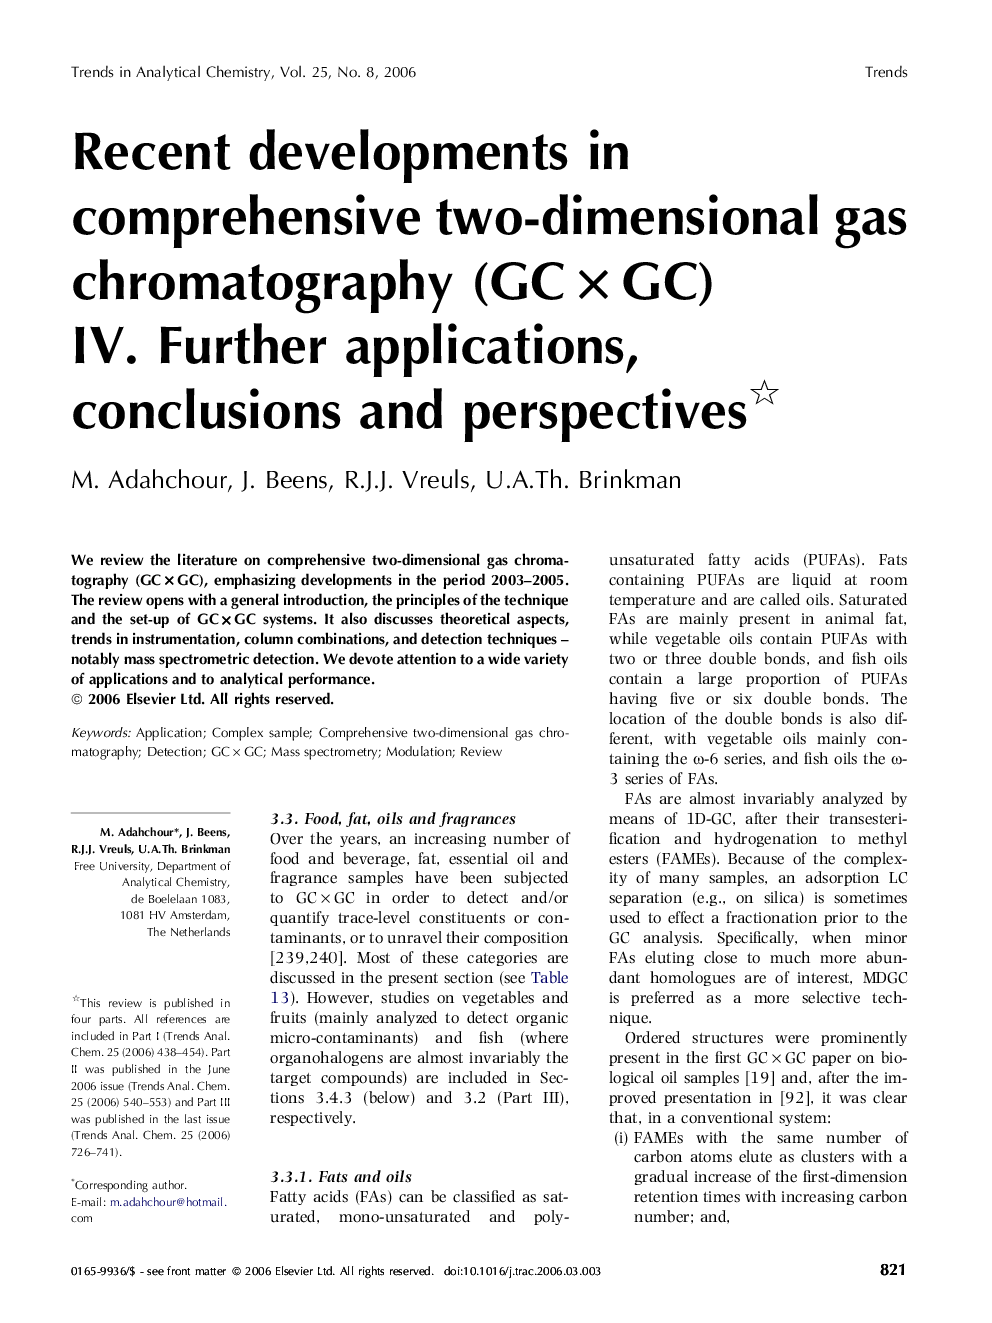 Recent developments in comprehensive two-dimensional gas chromatography (GC × GC) : IV. Further applications, conclusions and perspectives